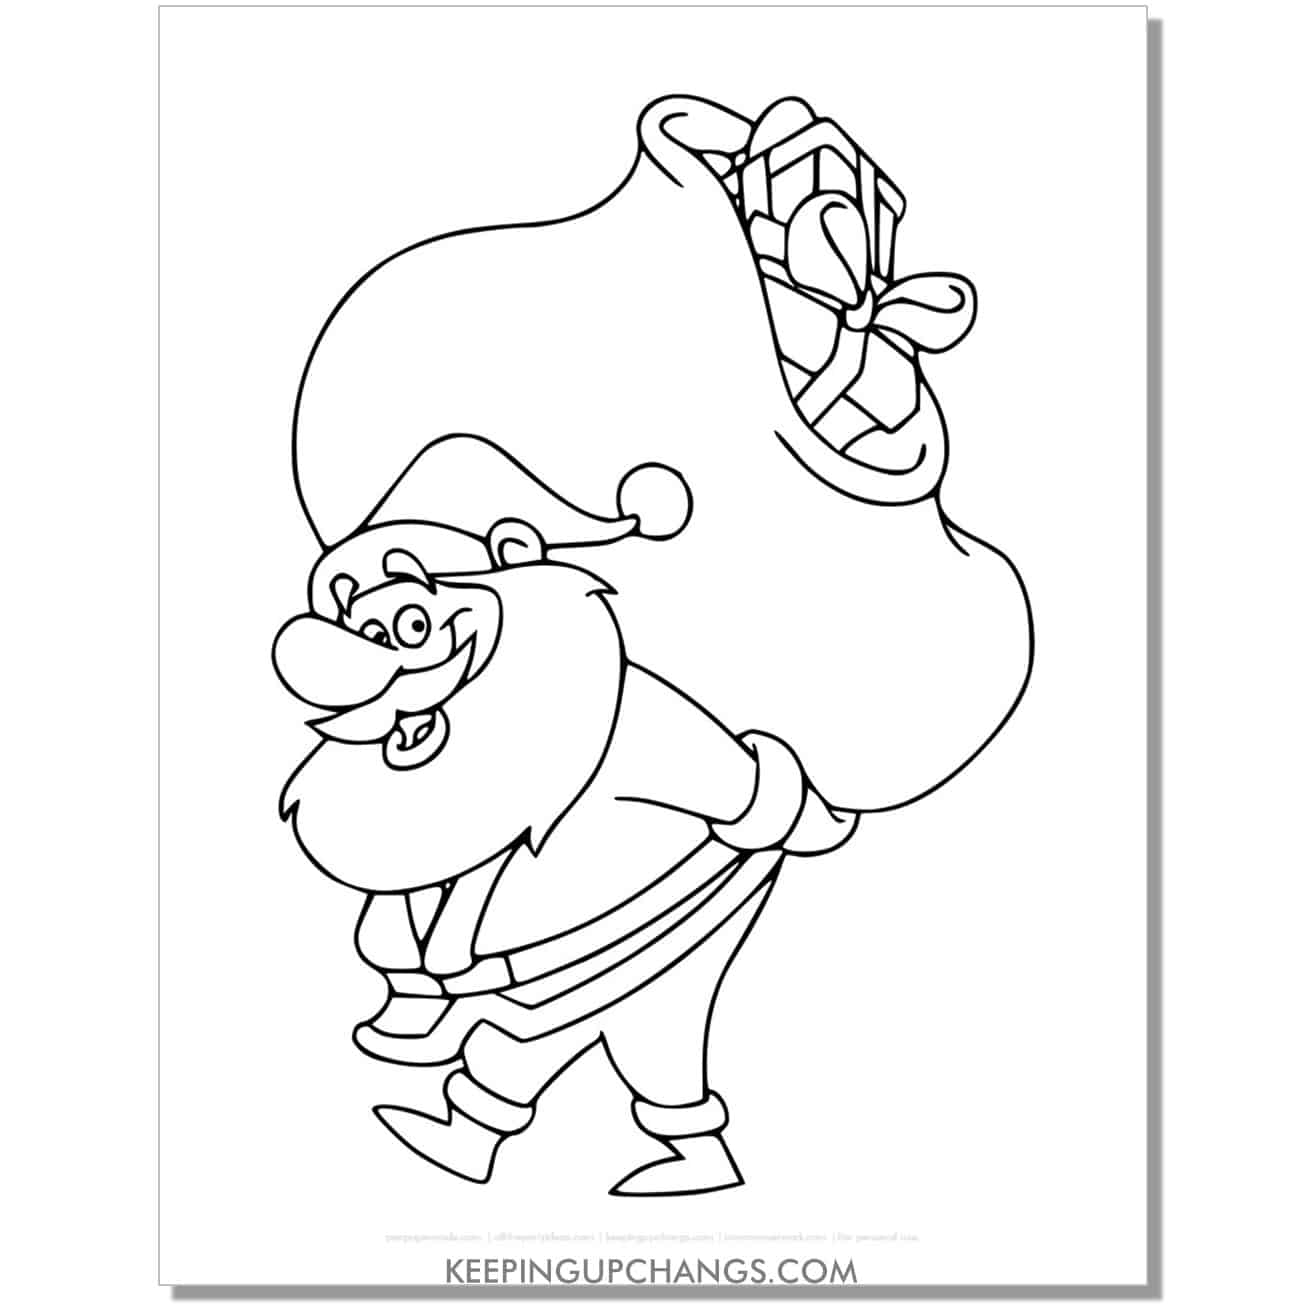 free cartoon santa with sack of presents on back coloring page.